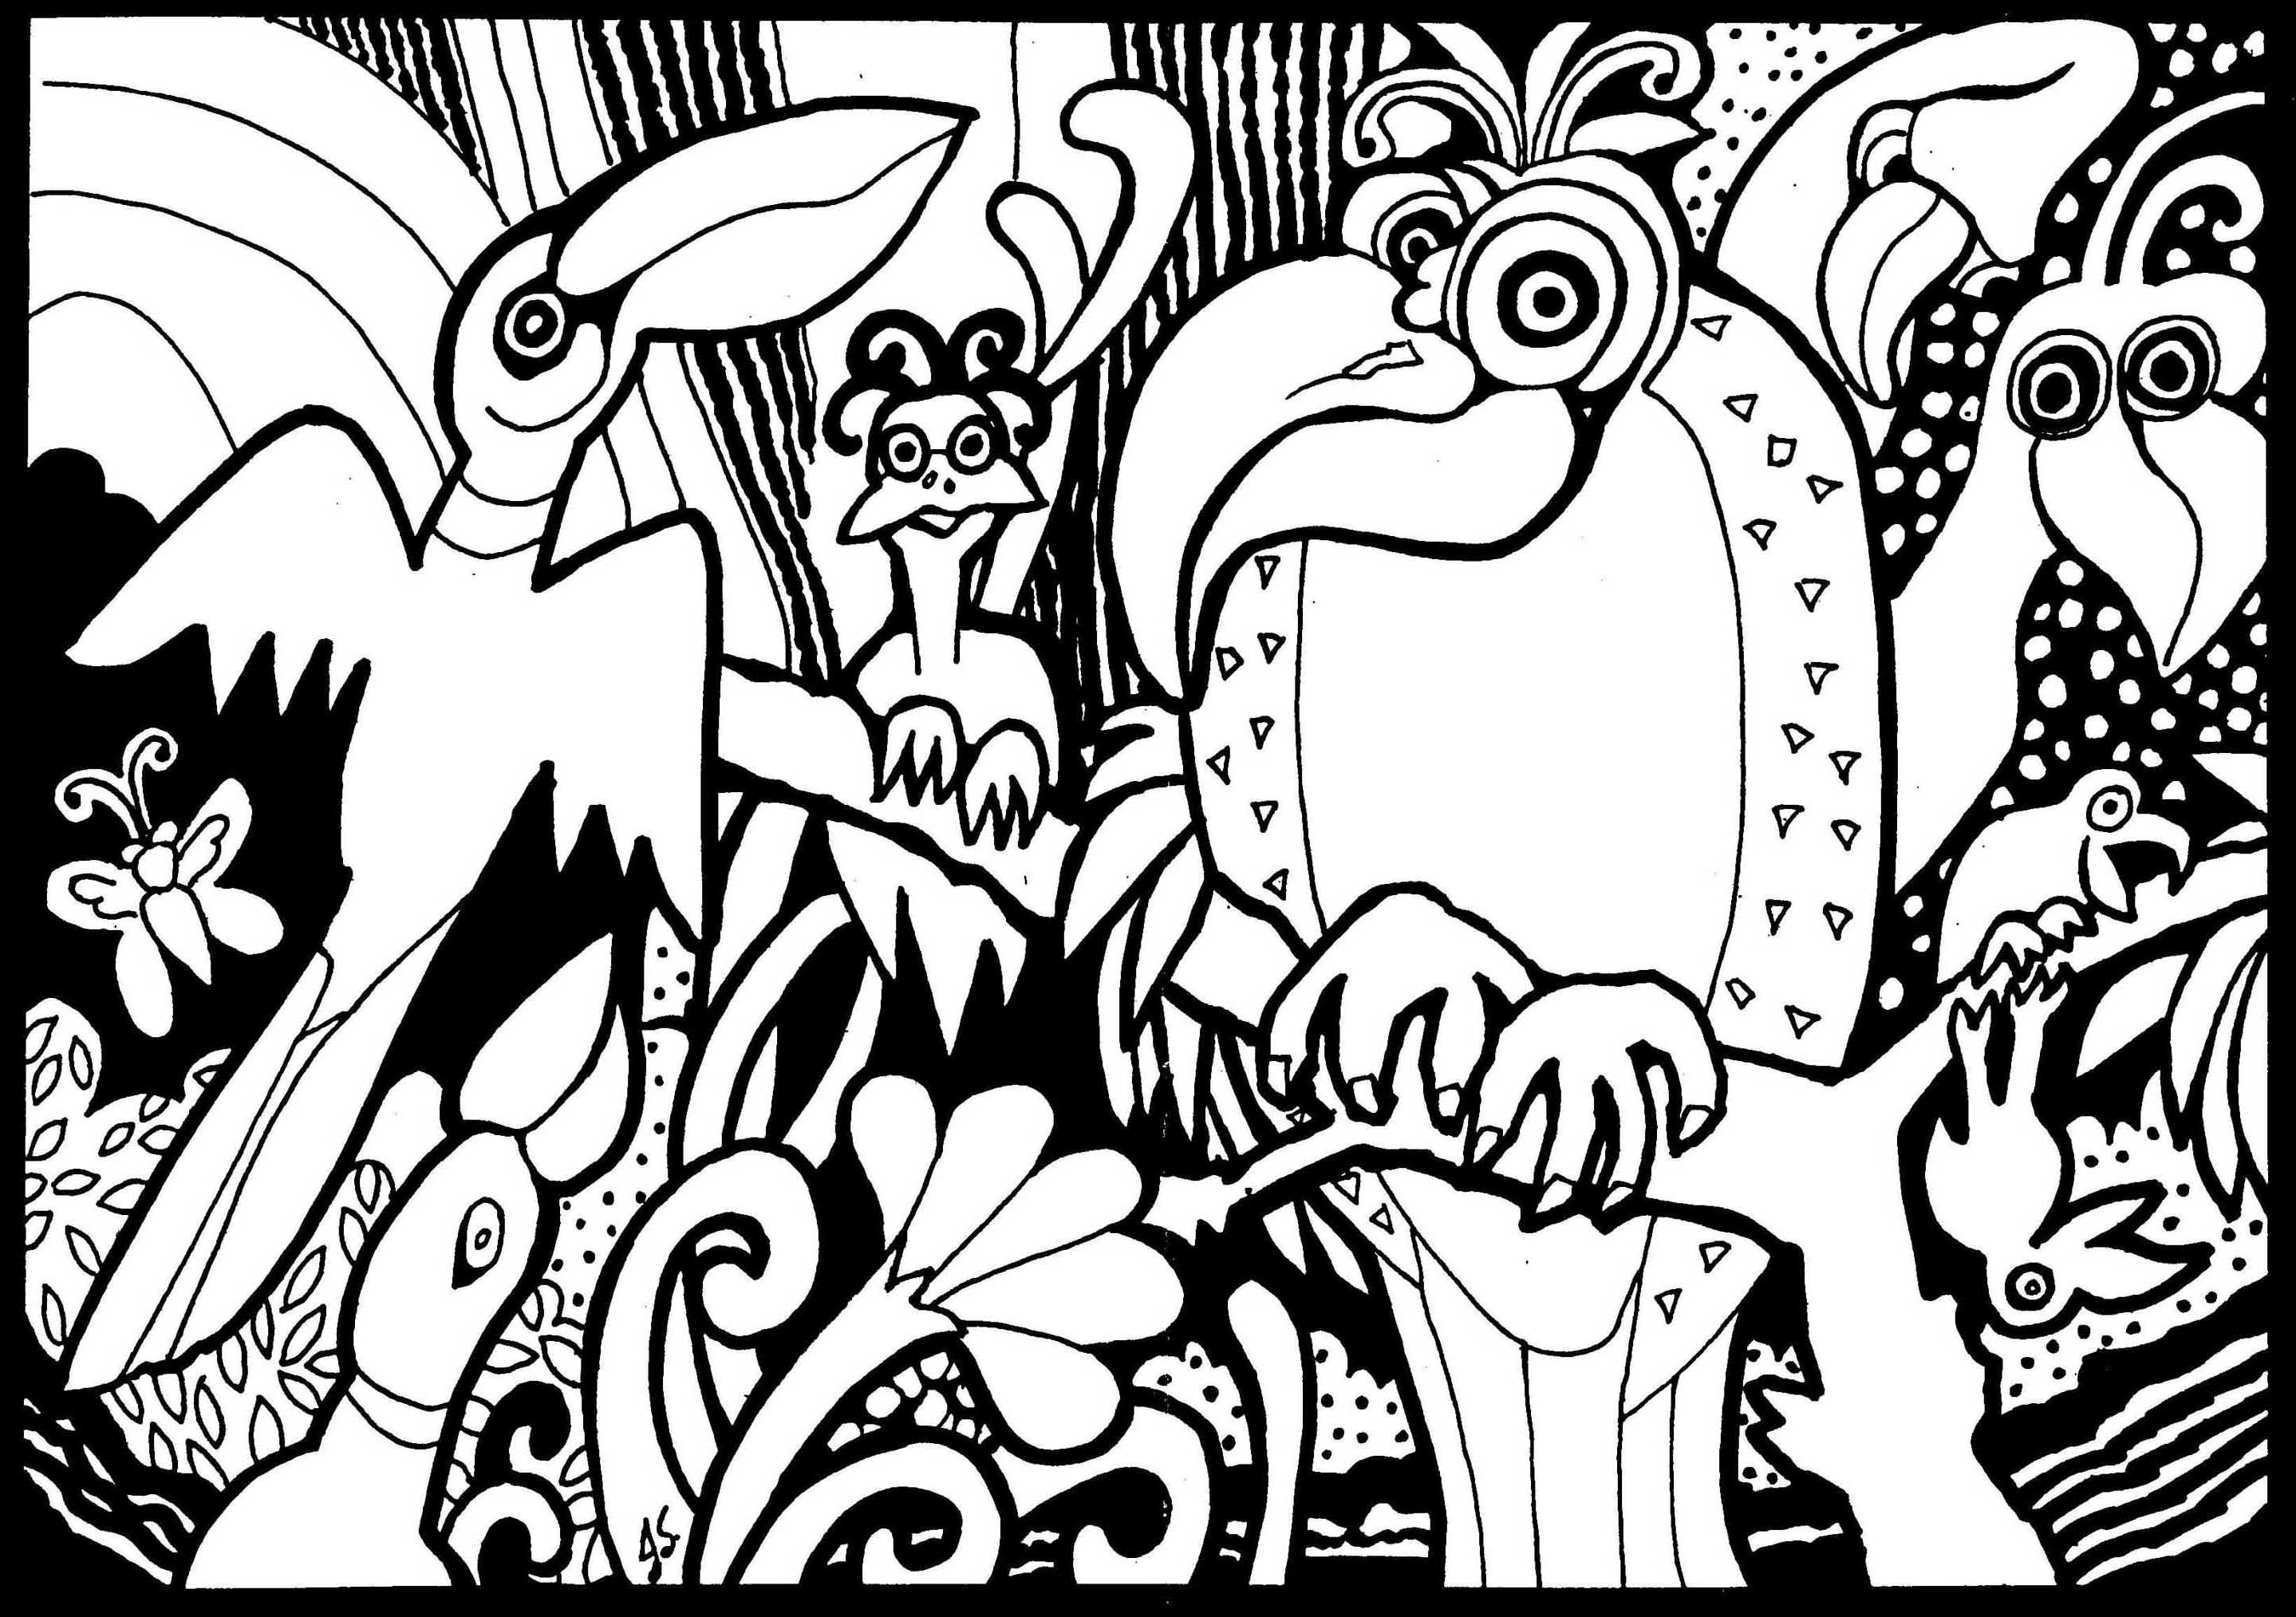 Birds coloring page to print and color